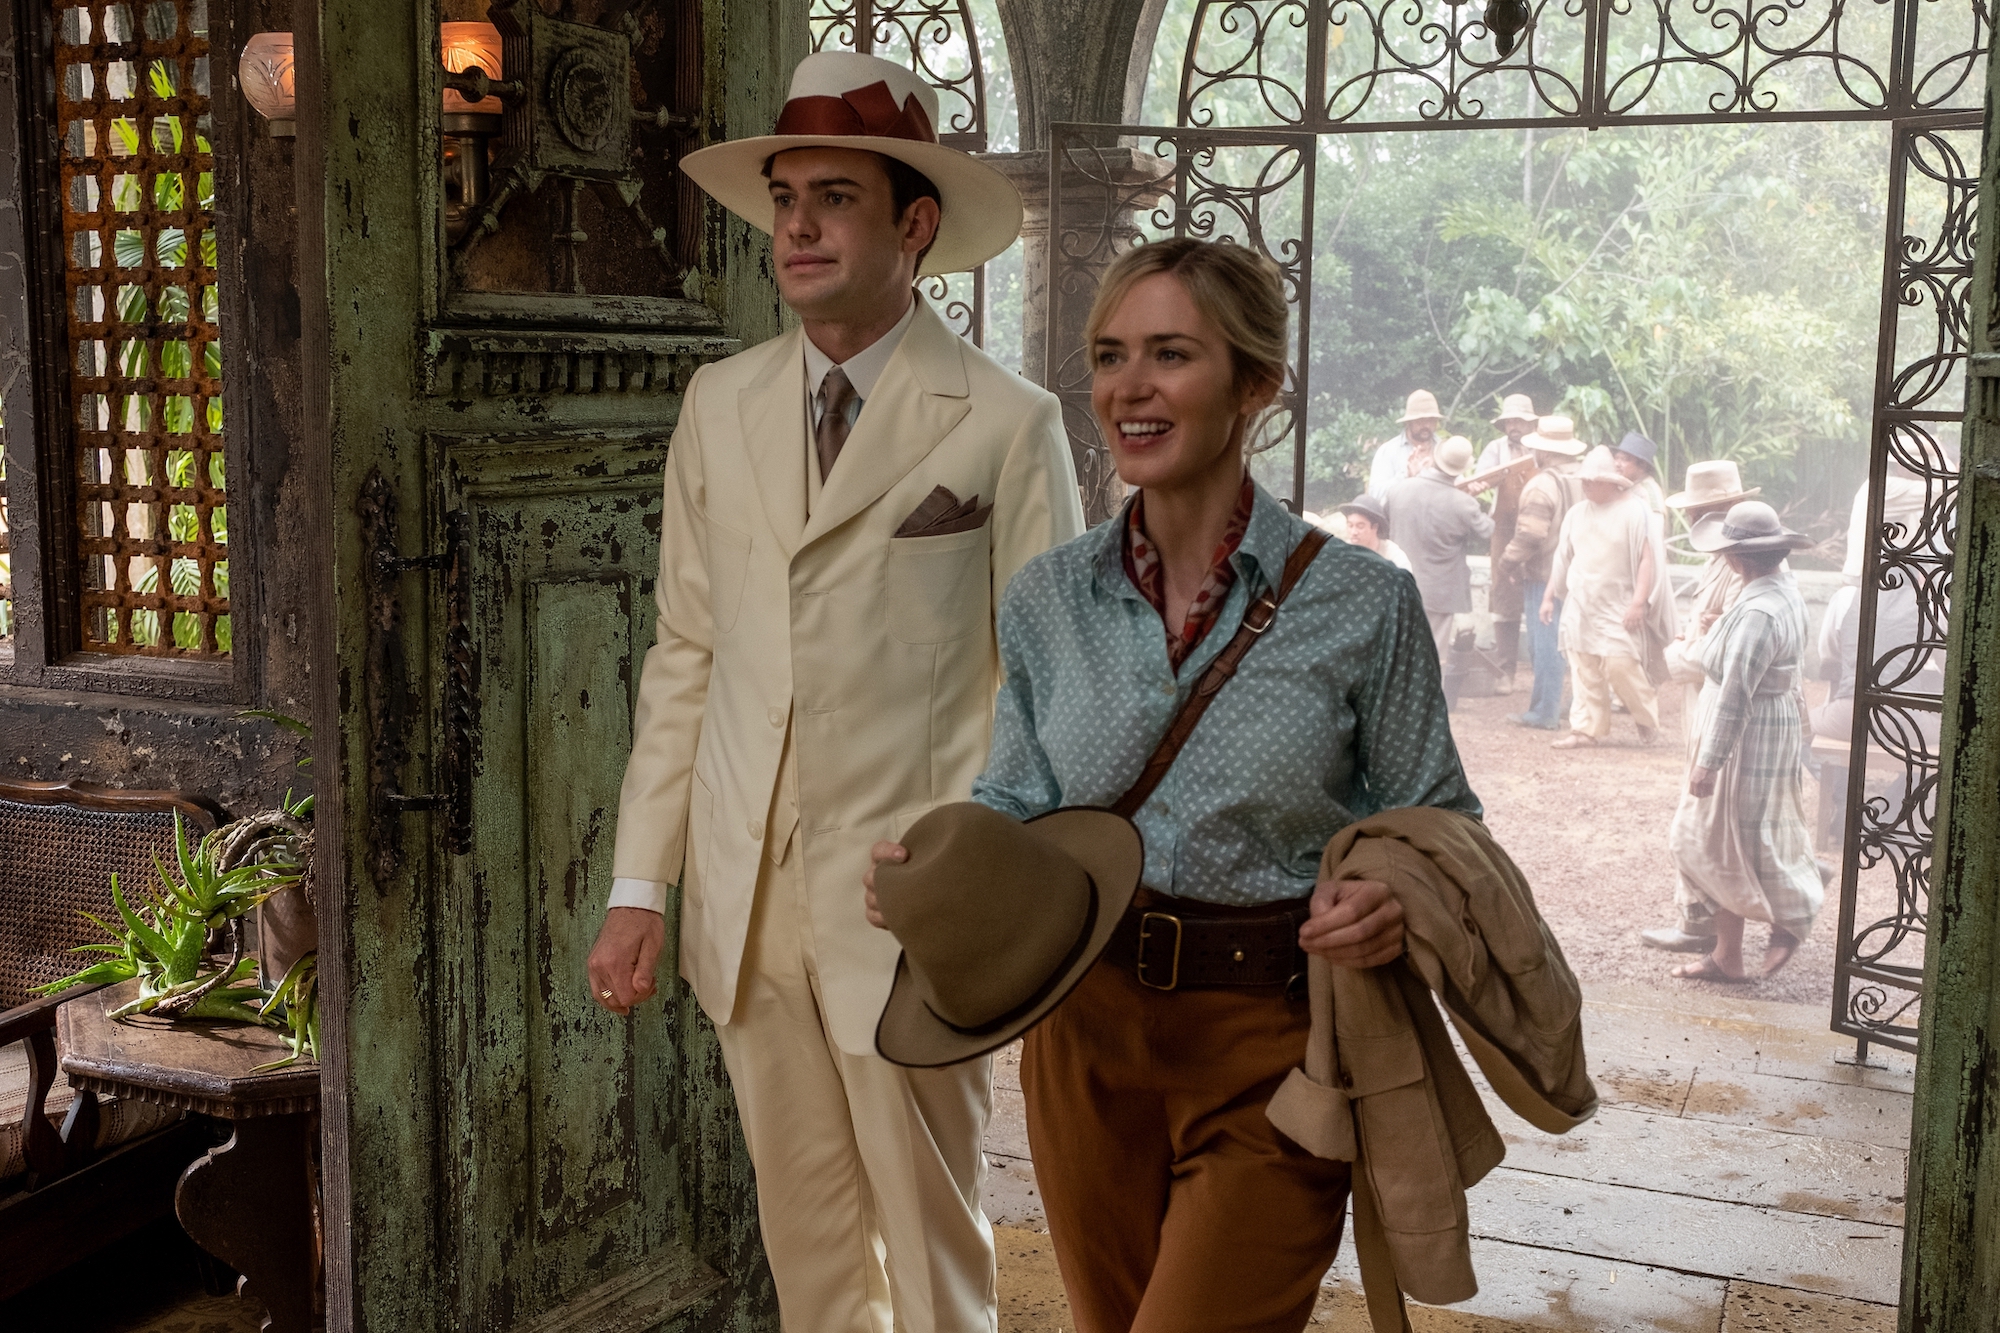 Emily Blunt and Jack Whitehall arrive in the Amazon